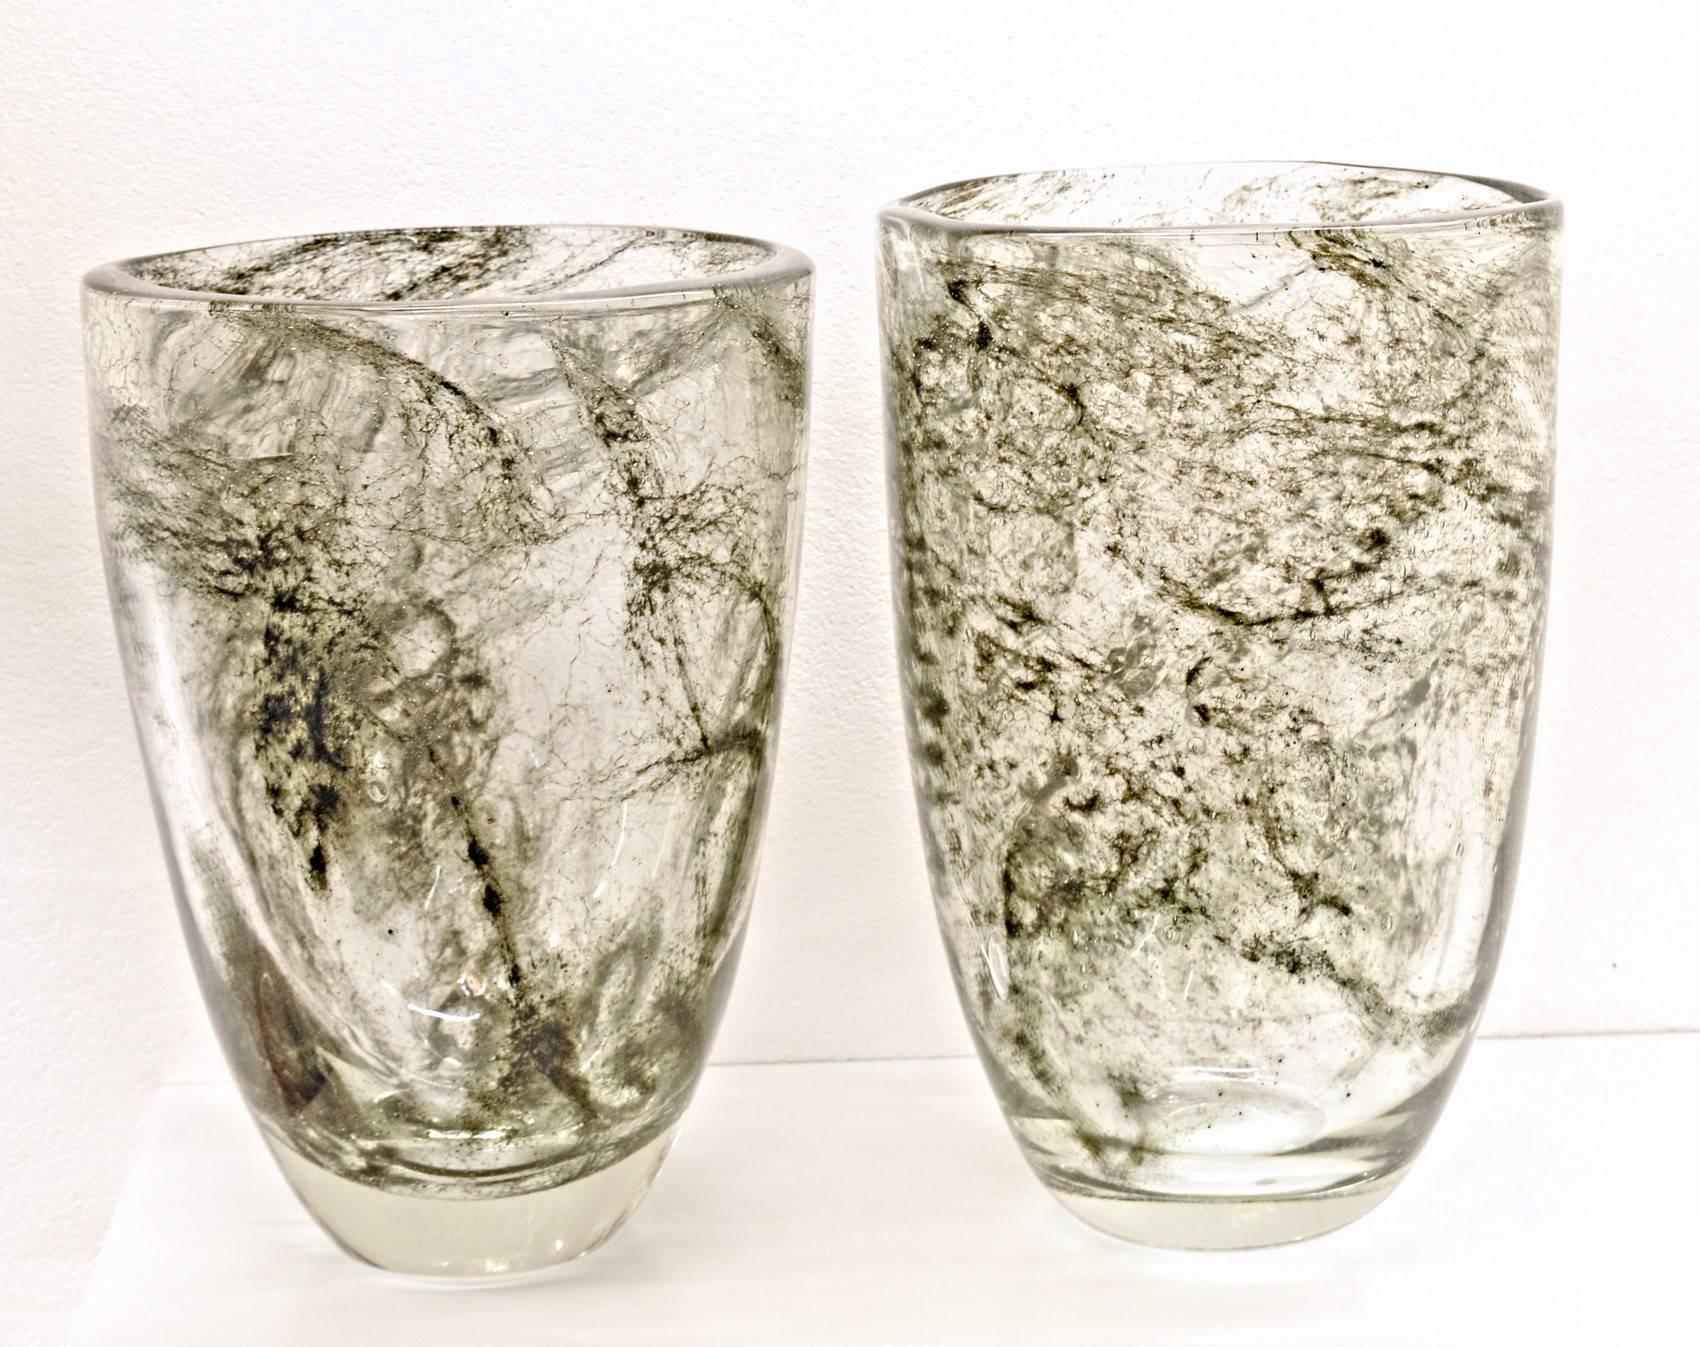 Two vases from the 